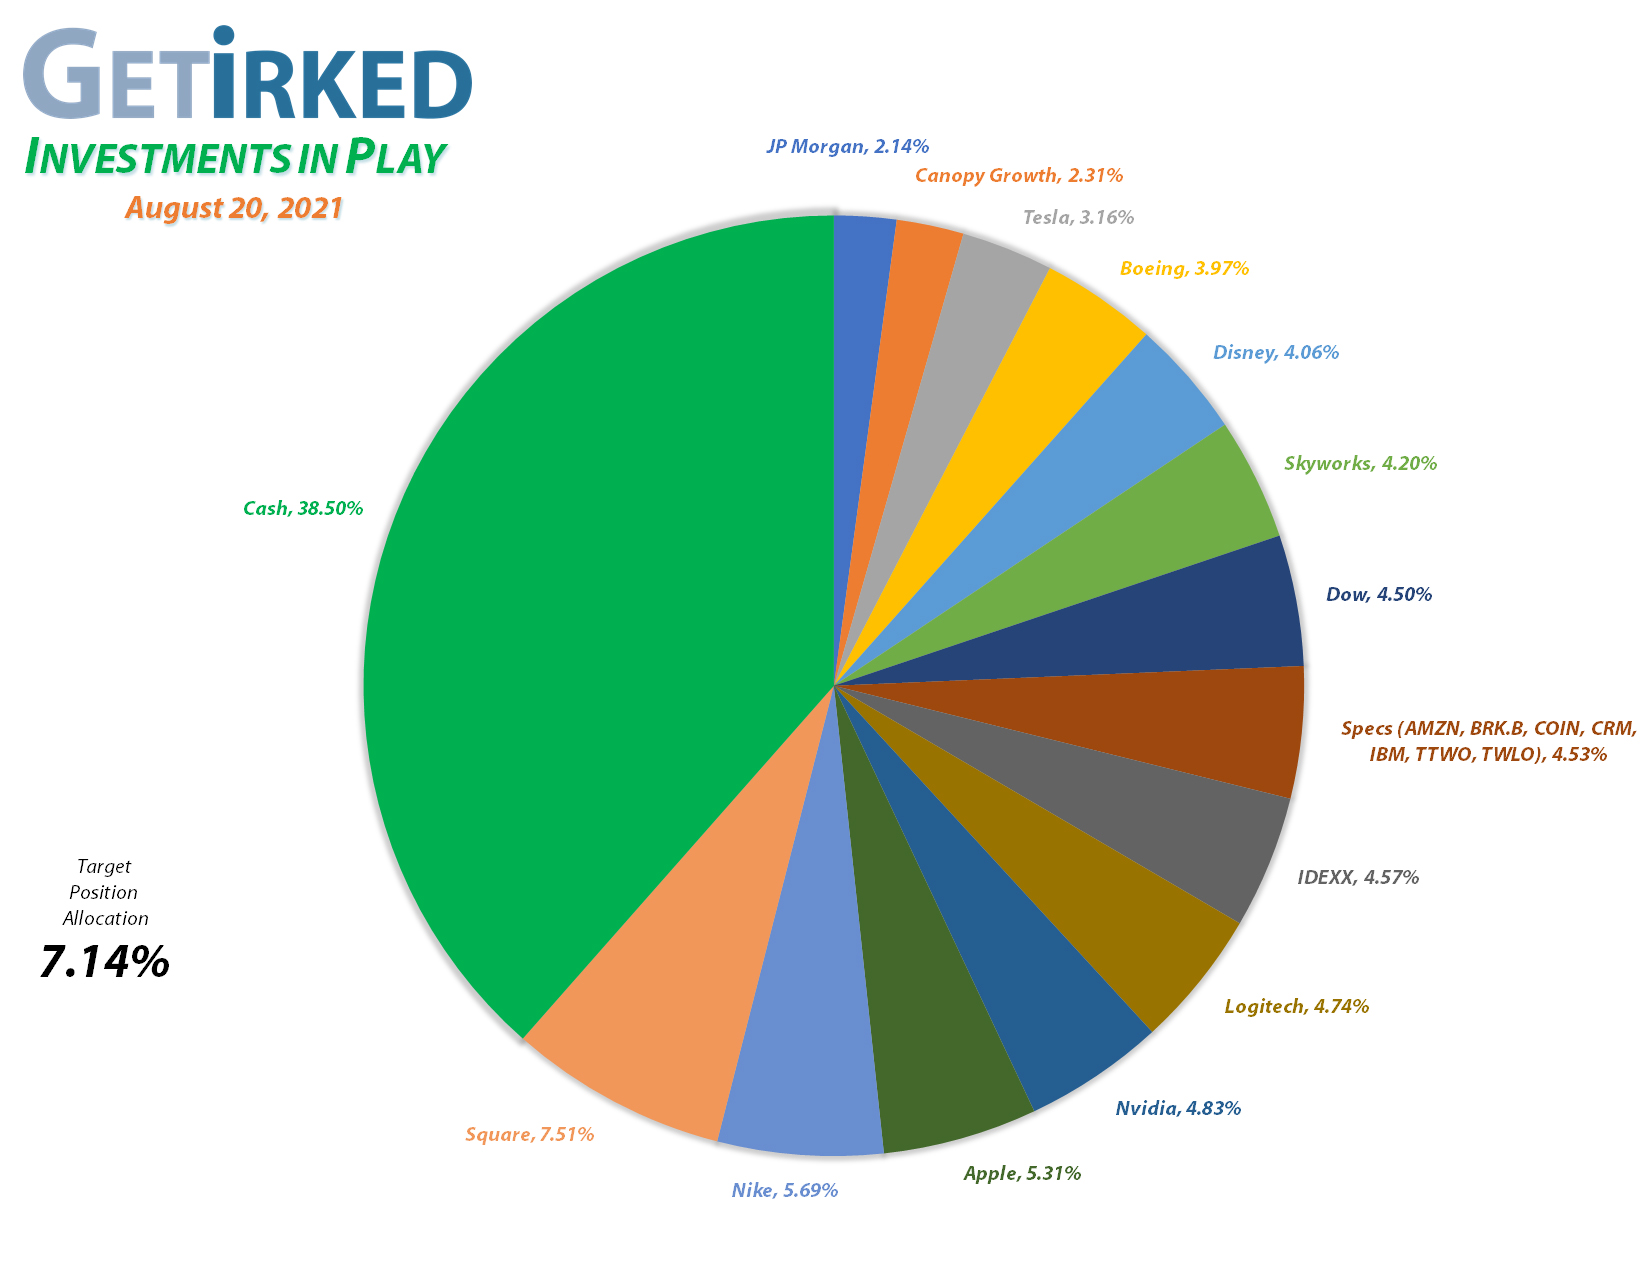 Get Irked - Investments in Play - Current Holdings - March 12, 2021et Irked's Pandemic Portfolio Holdings as of August 20, 2021